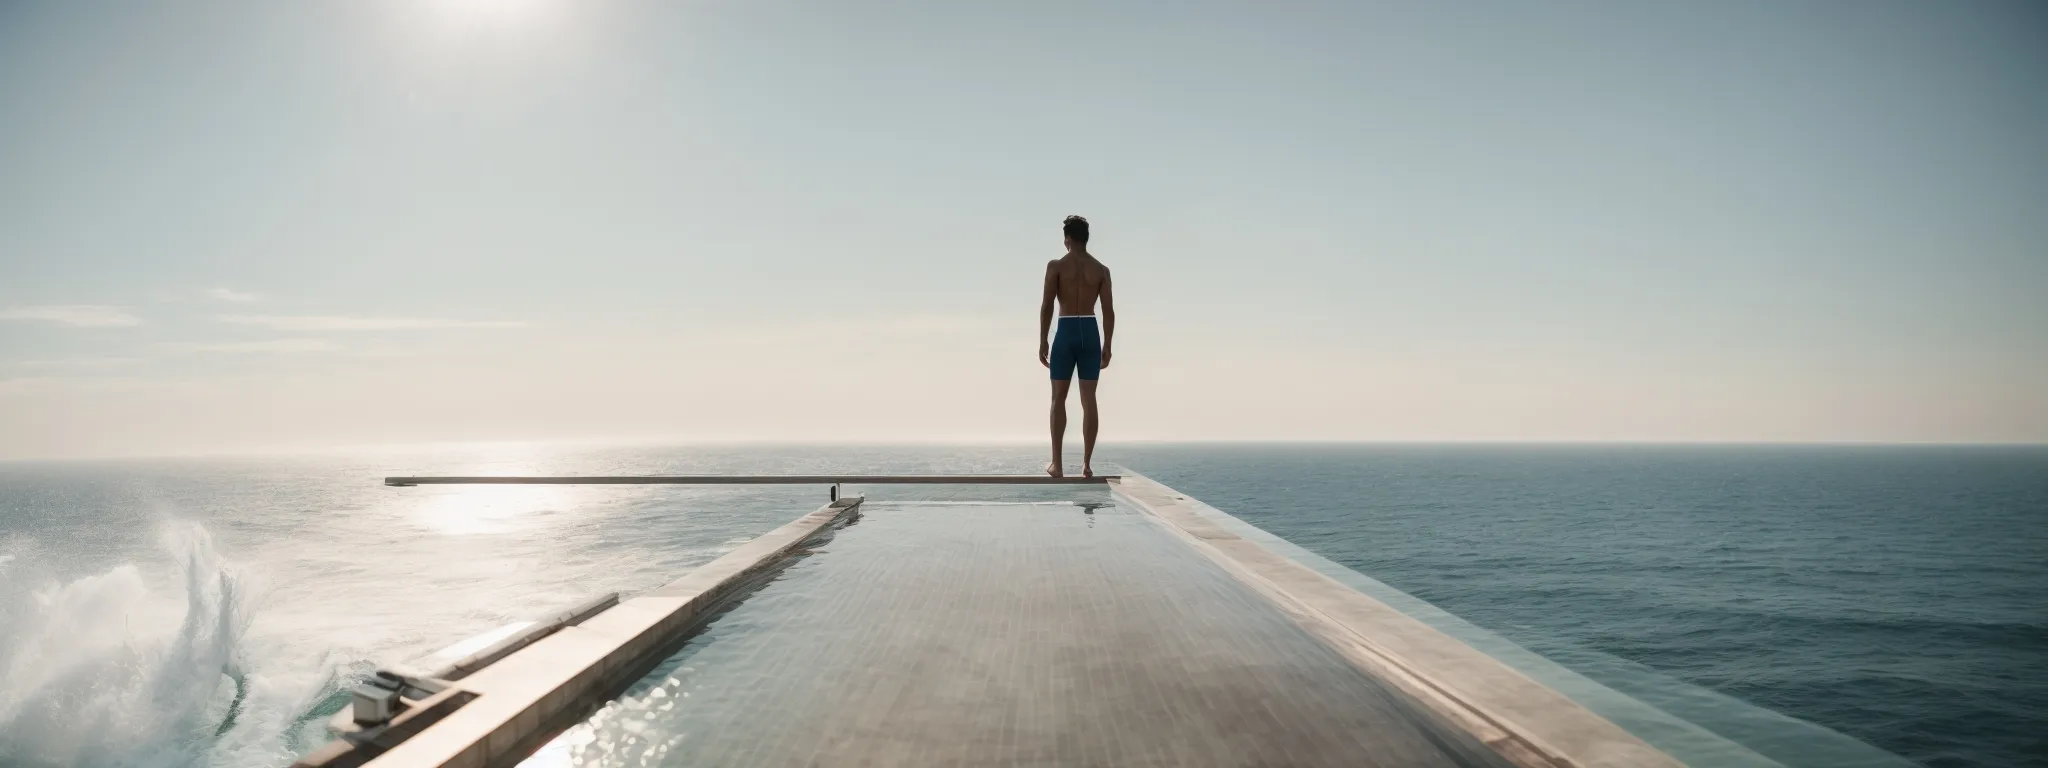 a person poised at the edge of a diving board, overlooking a vast, sunlit ocean, symbolizes the plunge into the expansive world of keyword research.